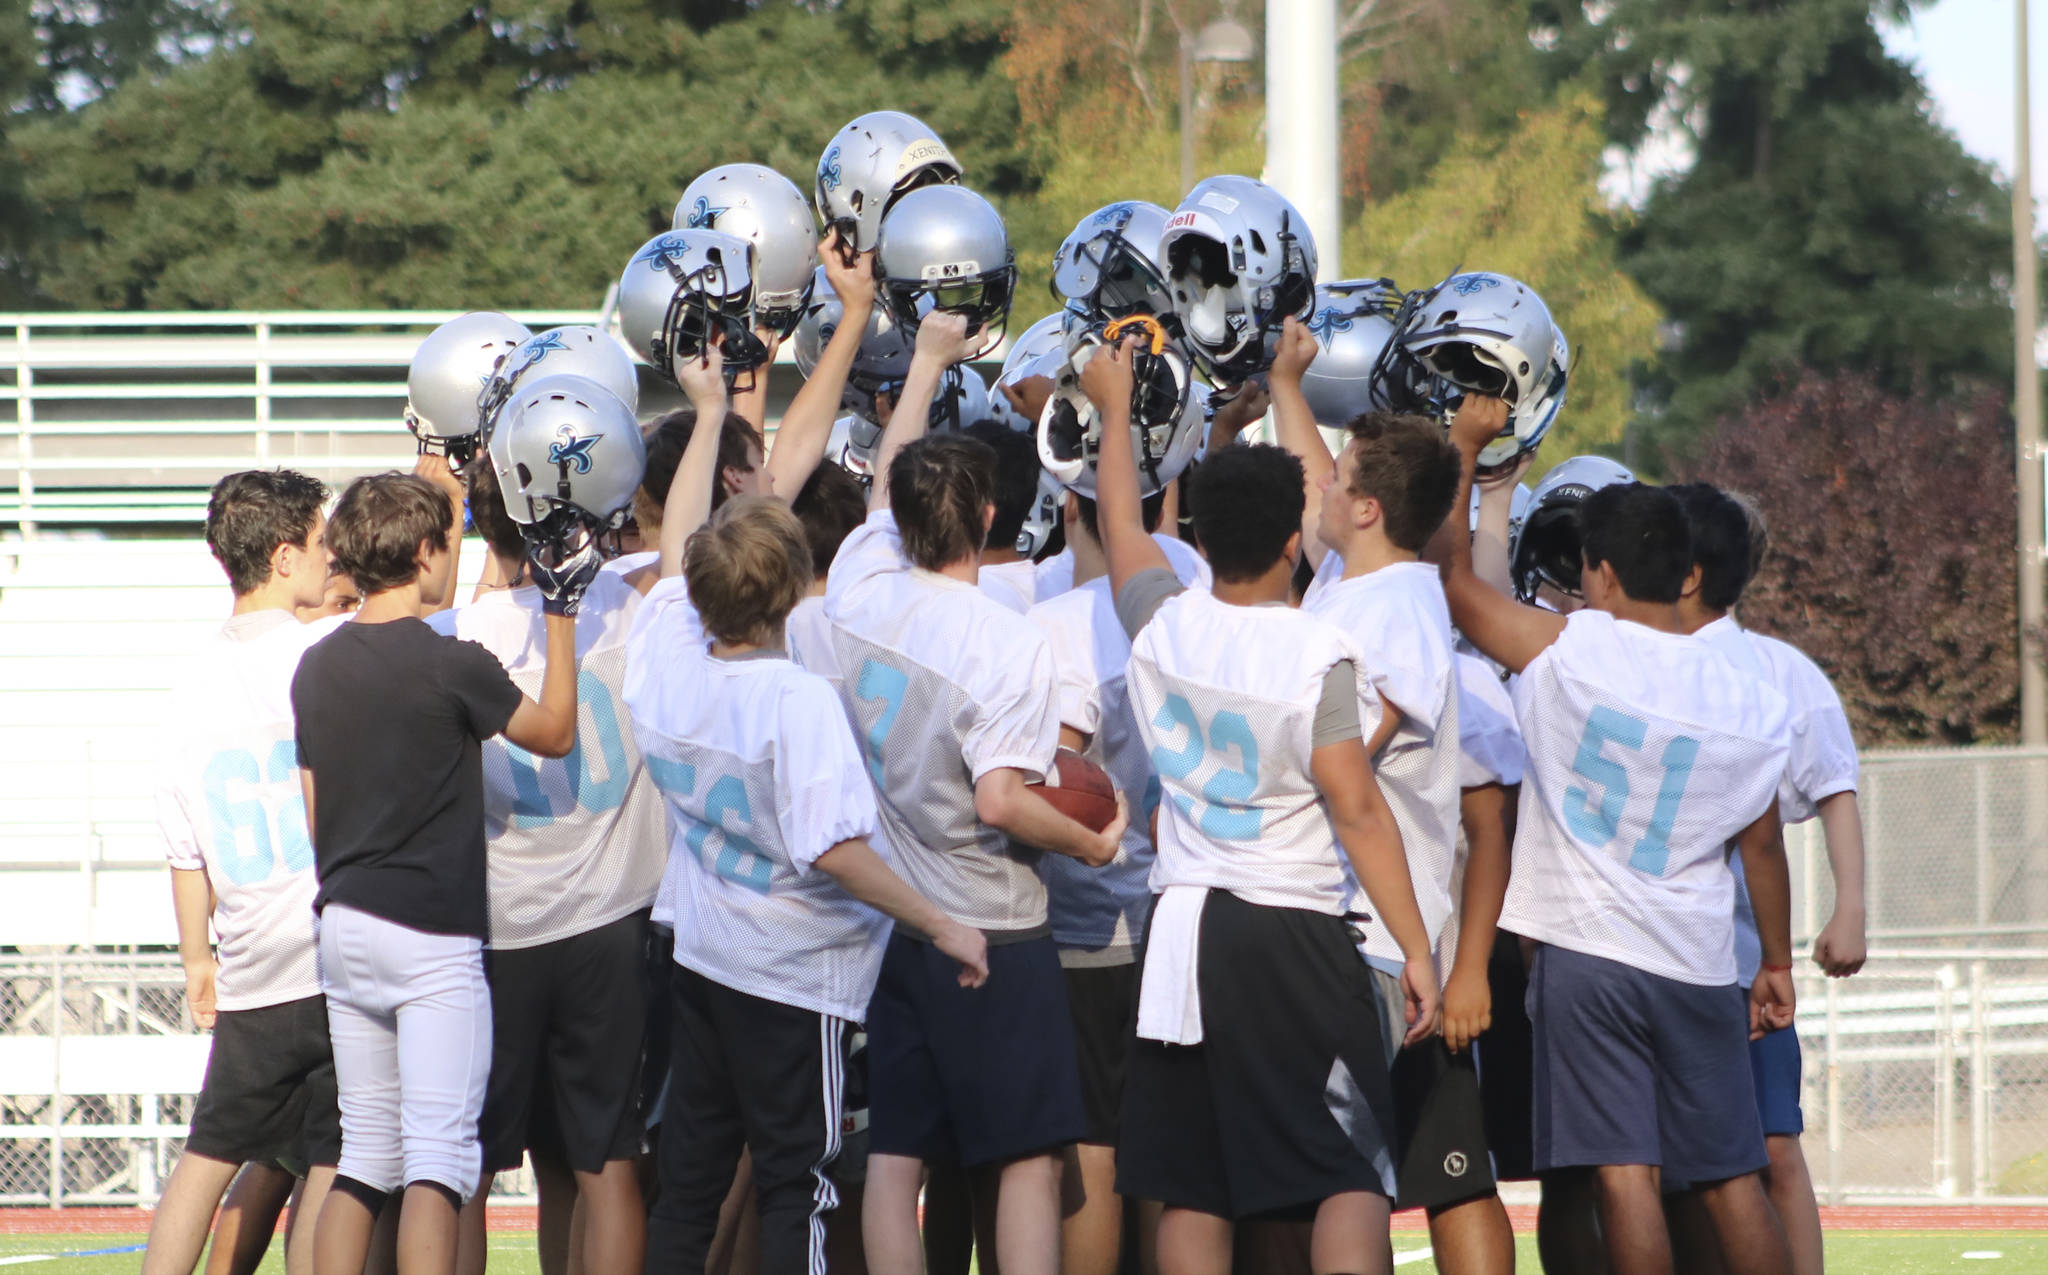 Interlake players raise their helmets at the end of practice. Benjamin Olson/ staff photo